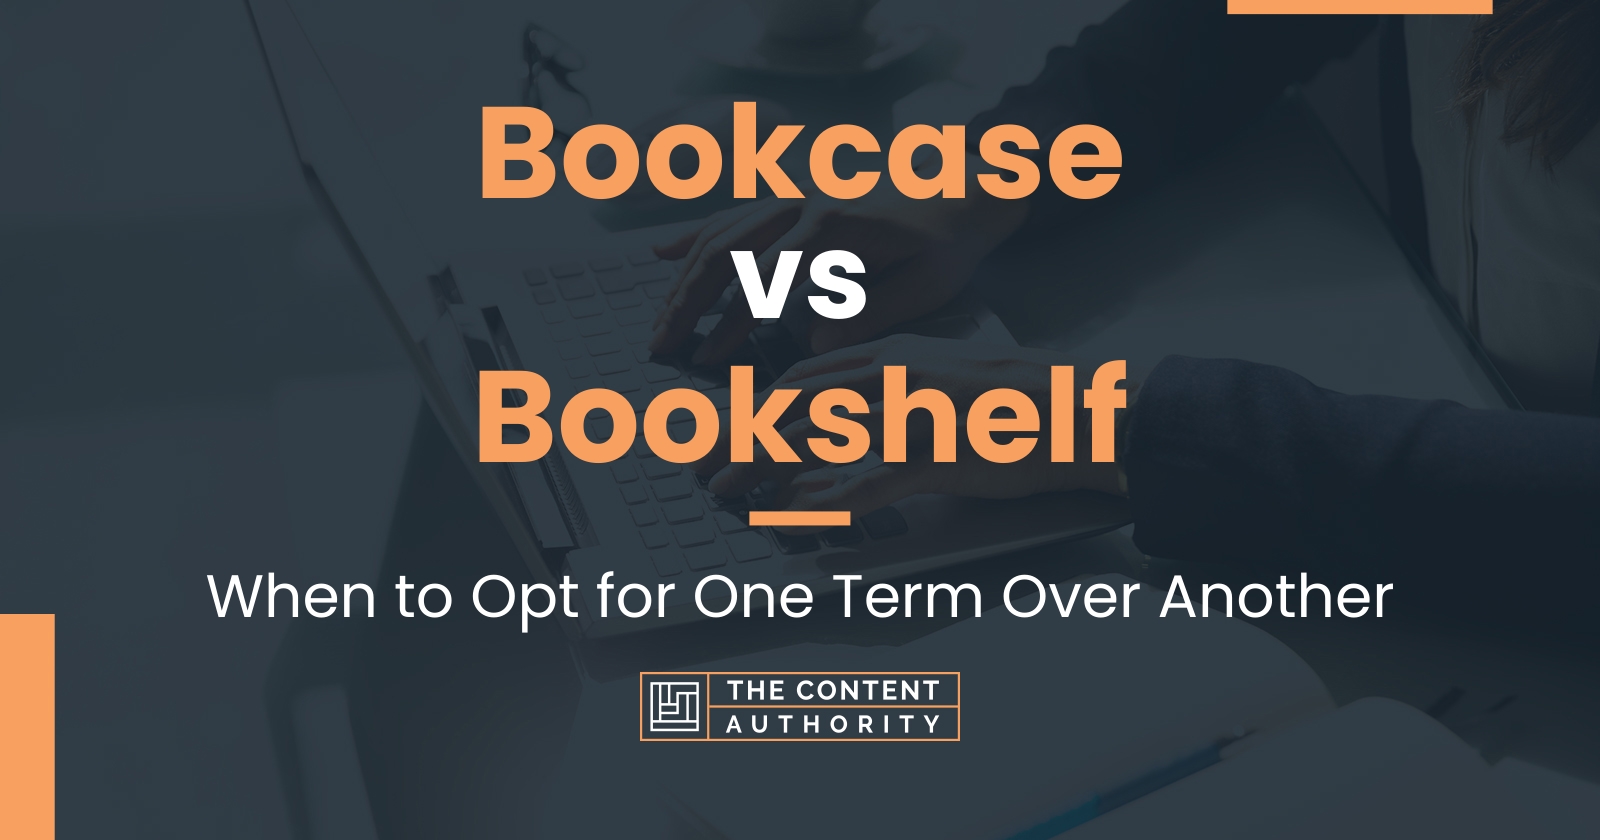 Bookcase vs Bookshelf: When to Opt for One Term Over Another